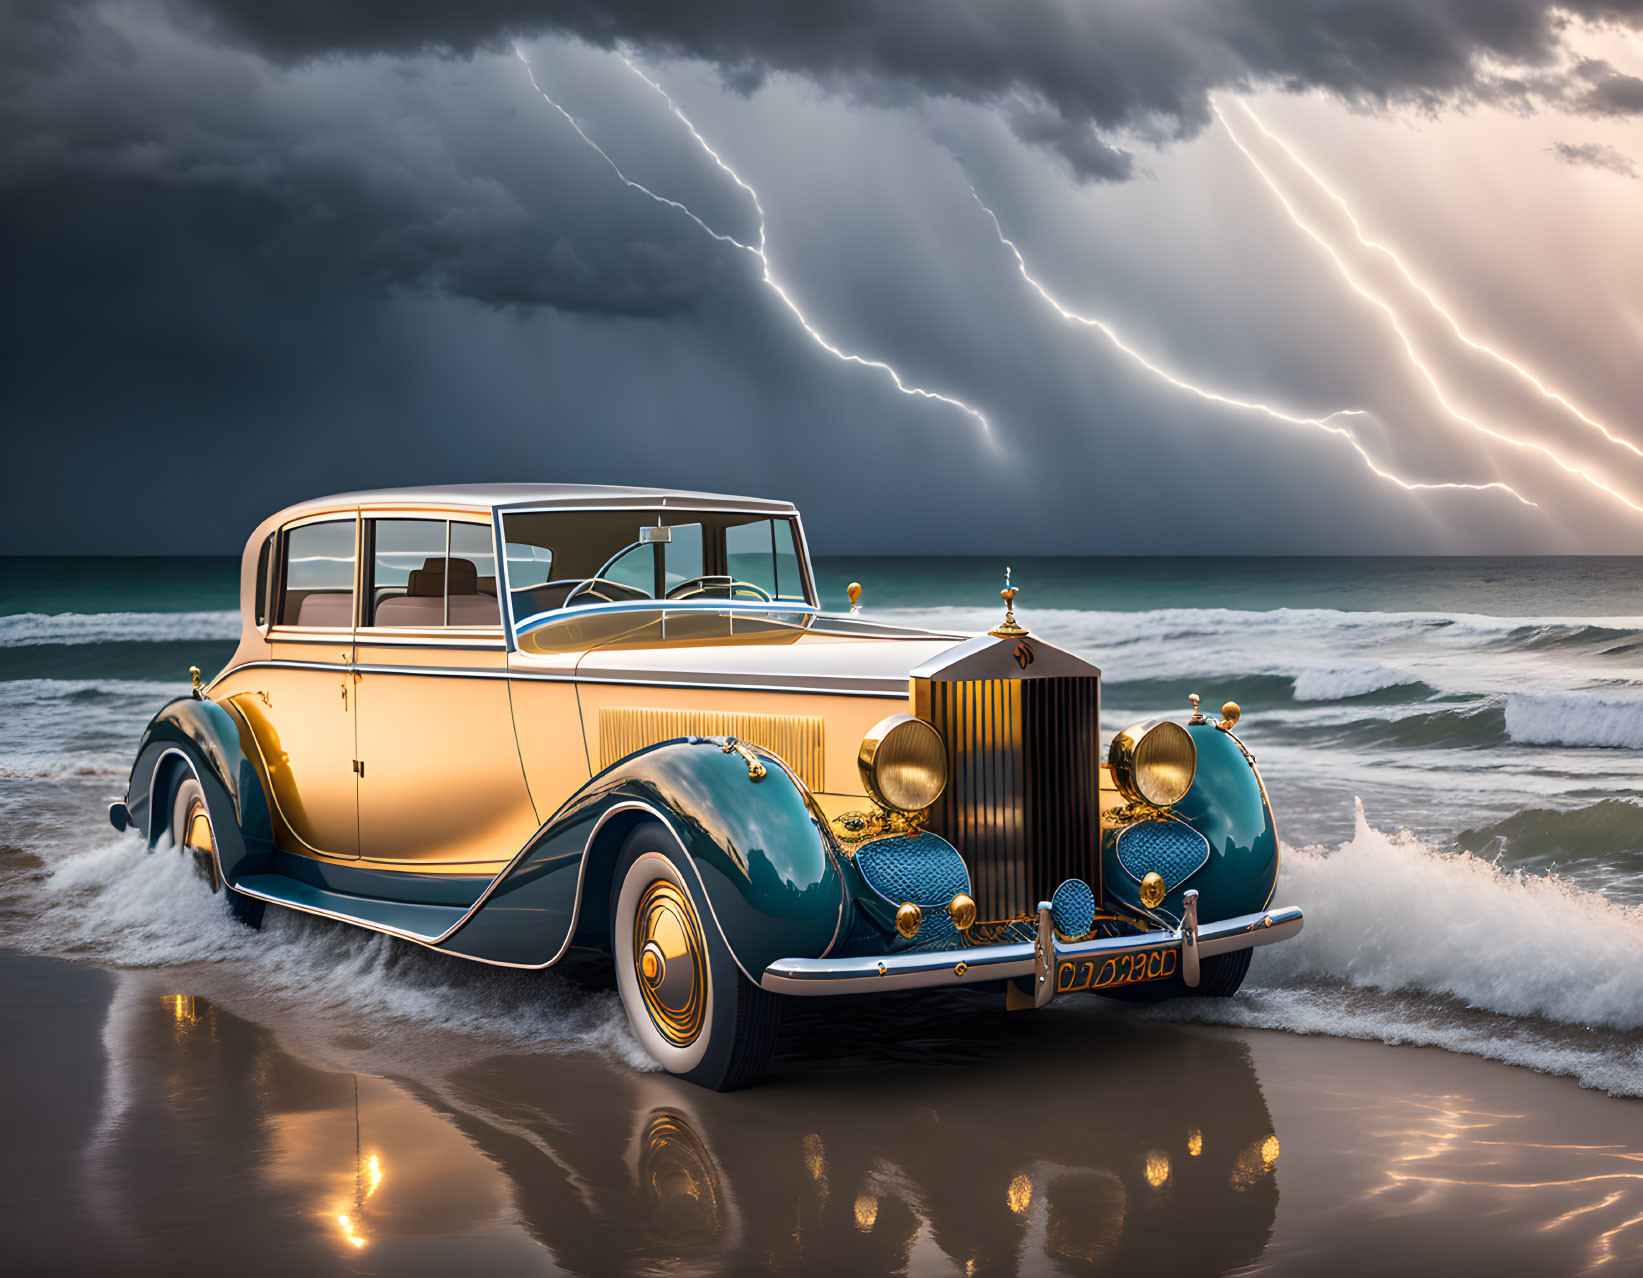 Vintage Car on Beach During Stormy Weather with Lightning